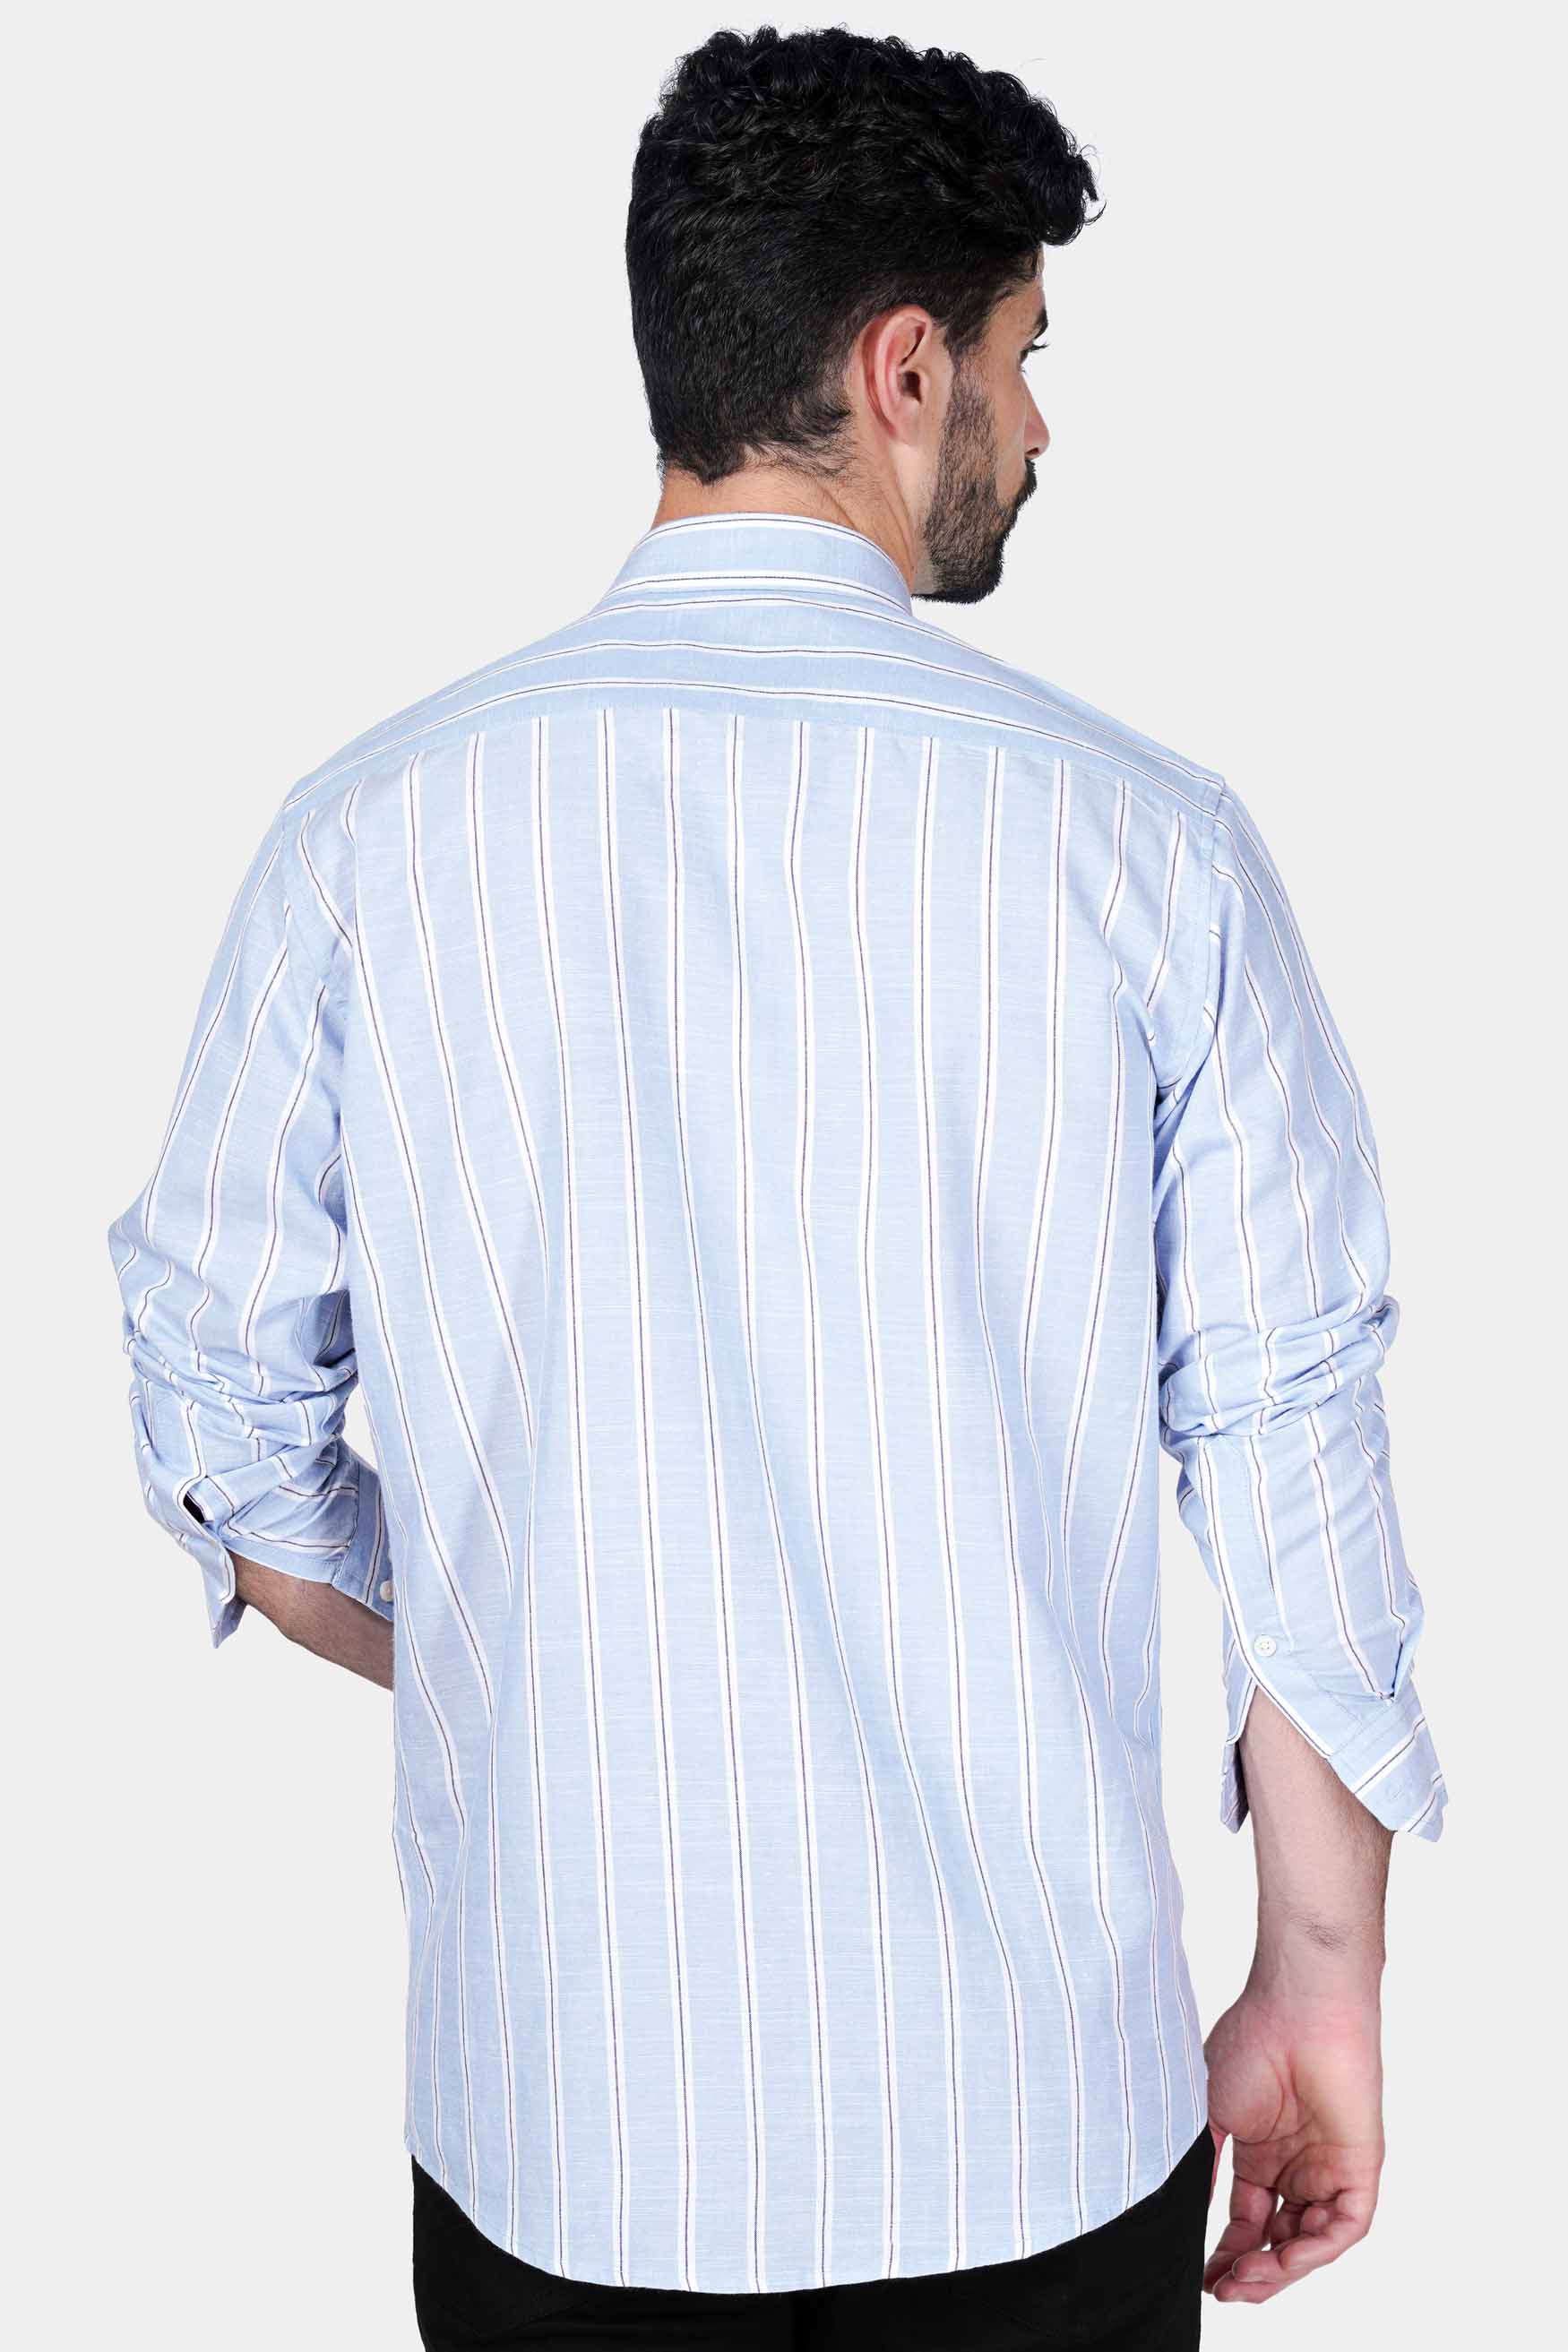 Periwinkle Blue and Bright White Striped with Patchwork Twill Premium Cotton Designer Shirt 7572-E290-38, 7572-E290-H-38, 7572-E290-39, 7572-E290-H-39, 7572-E290-40, 7572-E290-H-40, 7572-E290-42, 7572-E290-H-42, 7572-E290-44, 7572-E290-H-44, 7572-E290-46, 7572-E290-H-46, 7572-E290-48, 7572-E290-H-48, 7572-E290-50, 7572-E290-H-50, 7572-E290-52, 7572-E290-H-52